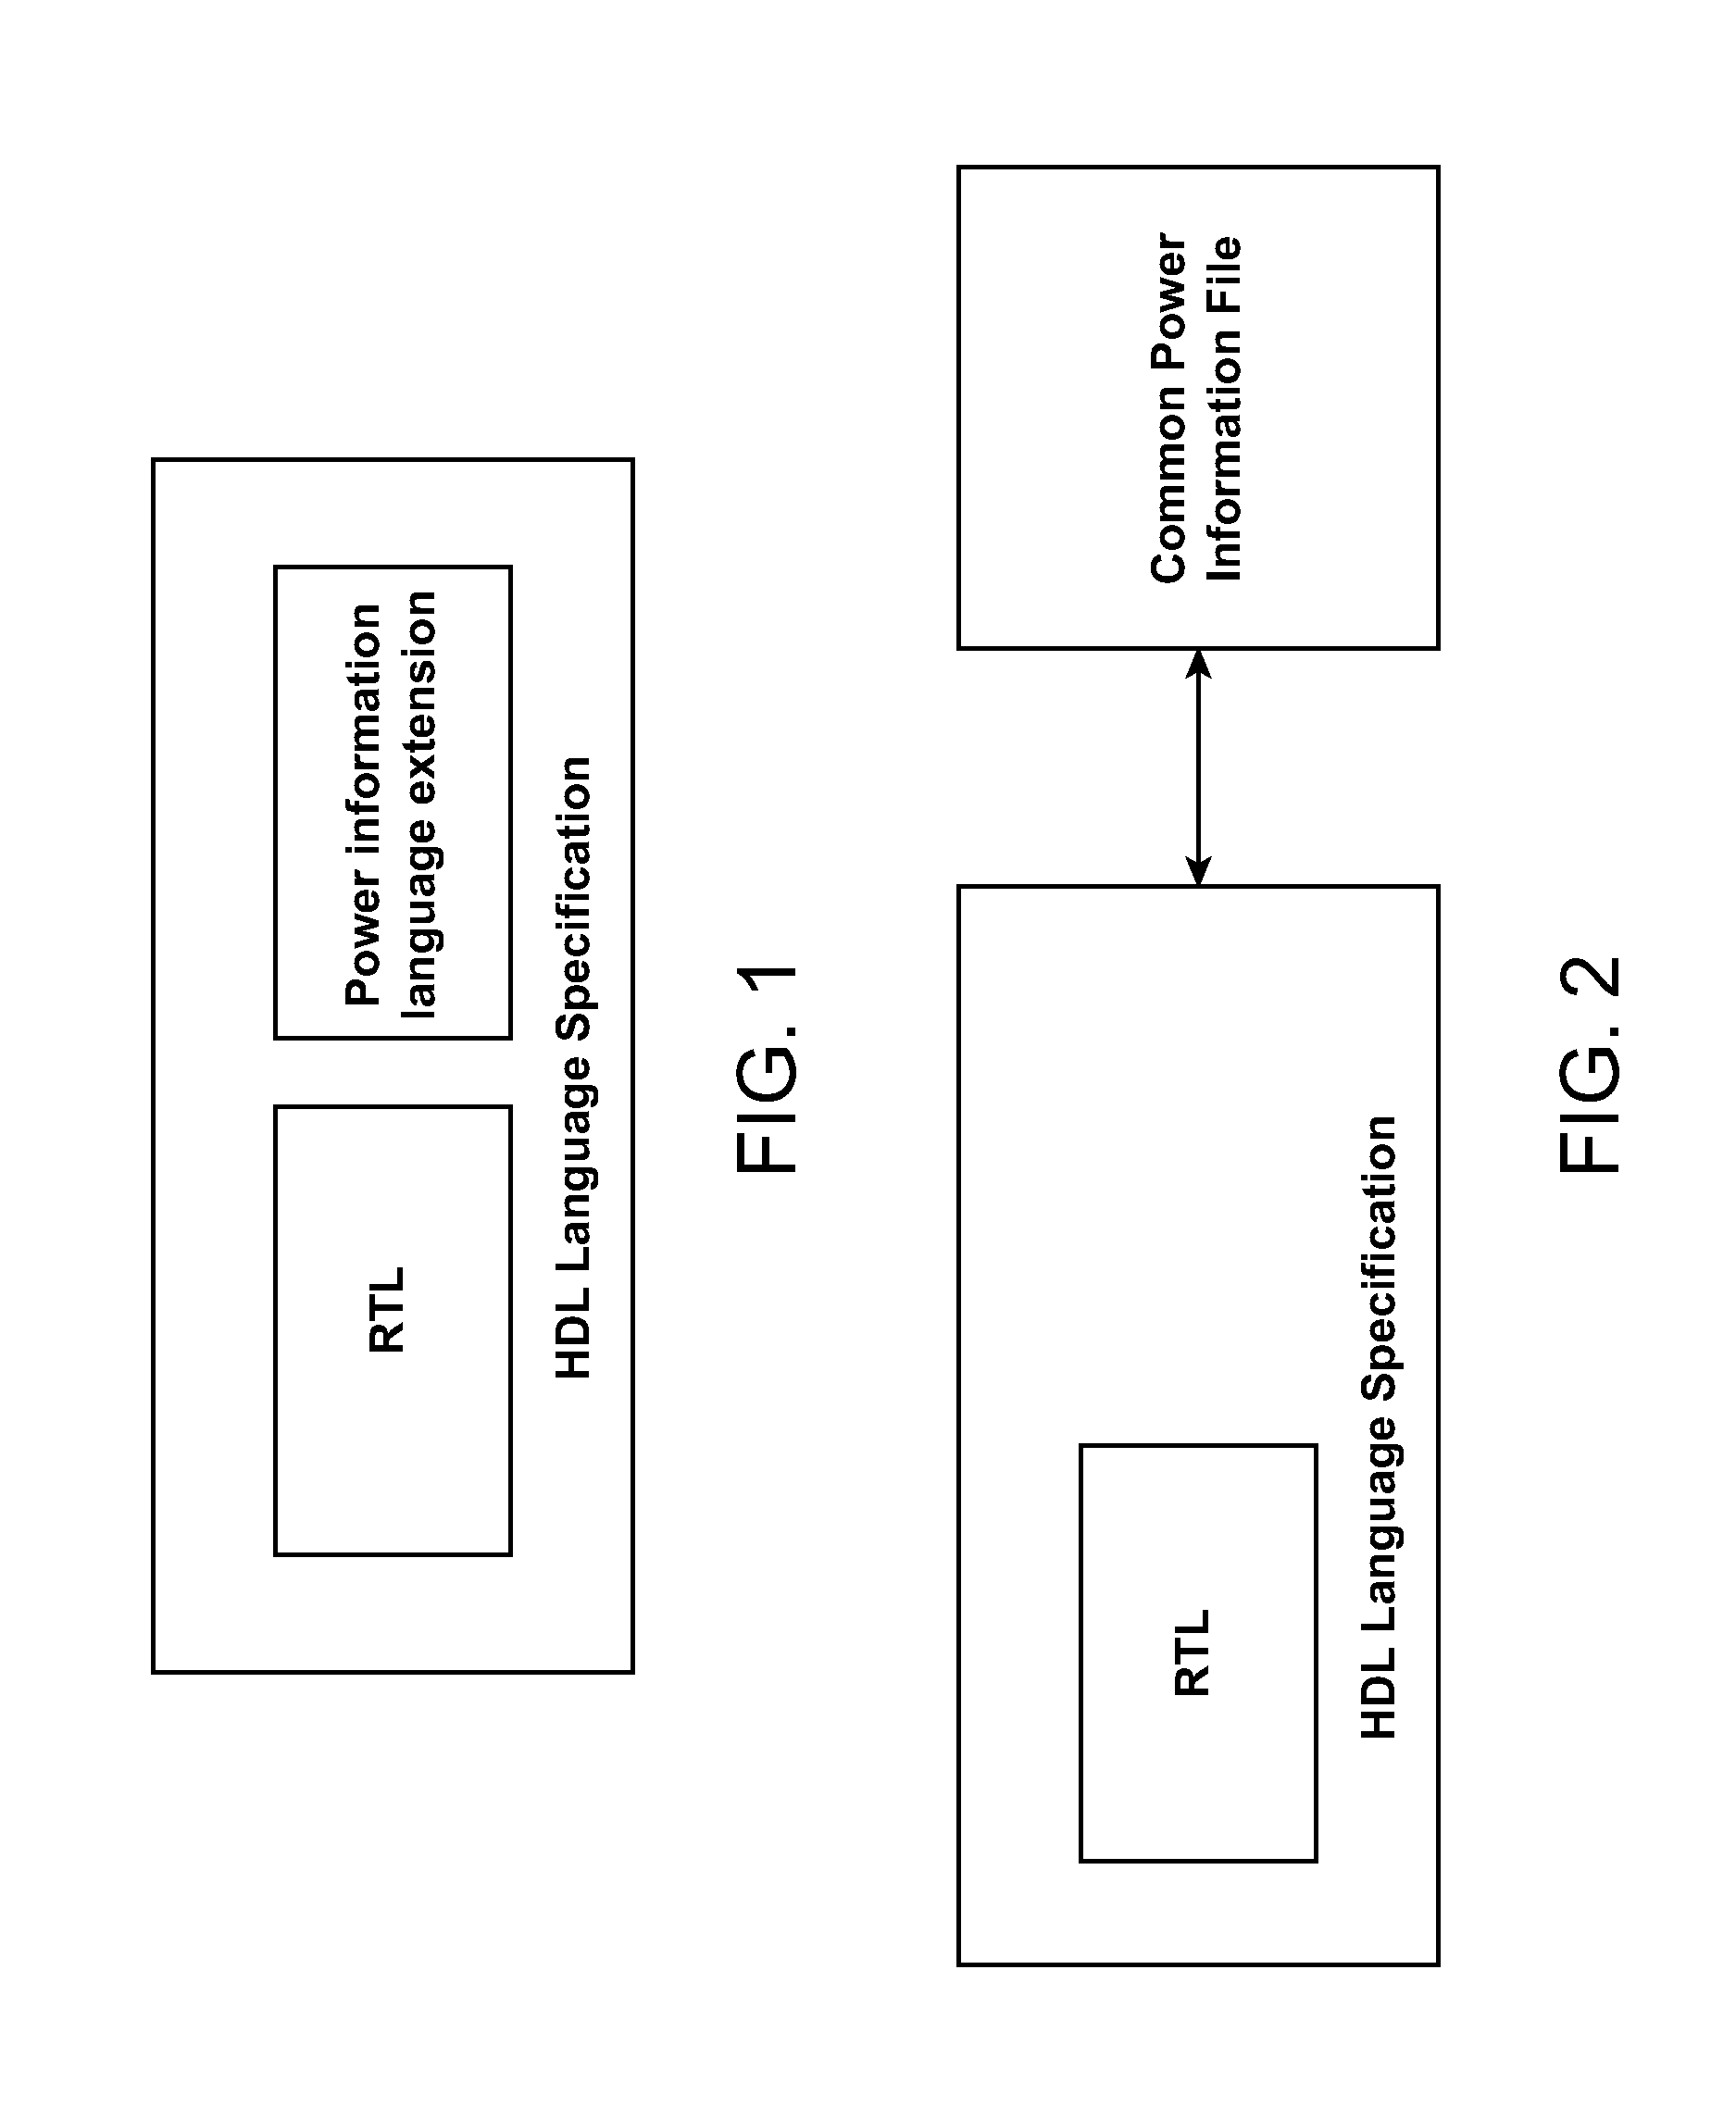 High level IC design with power specification and power source hierarchy